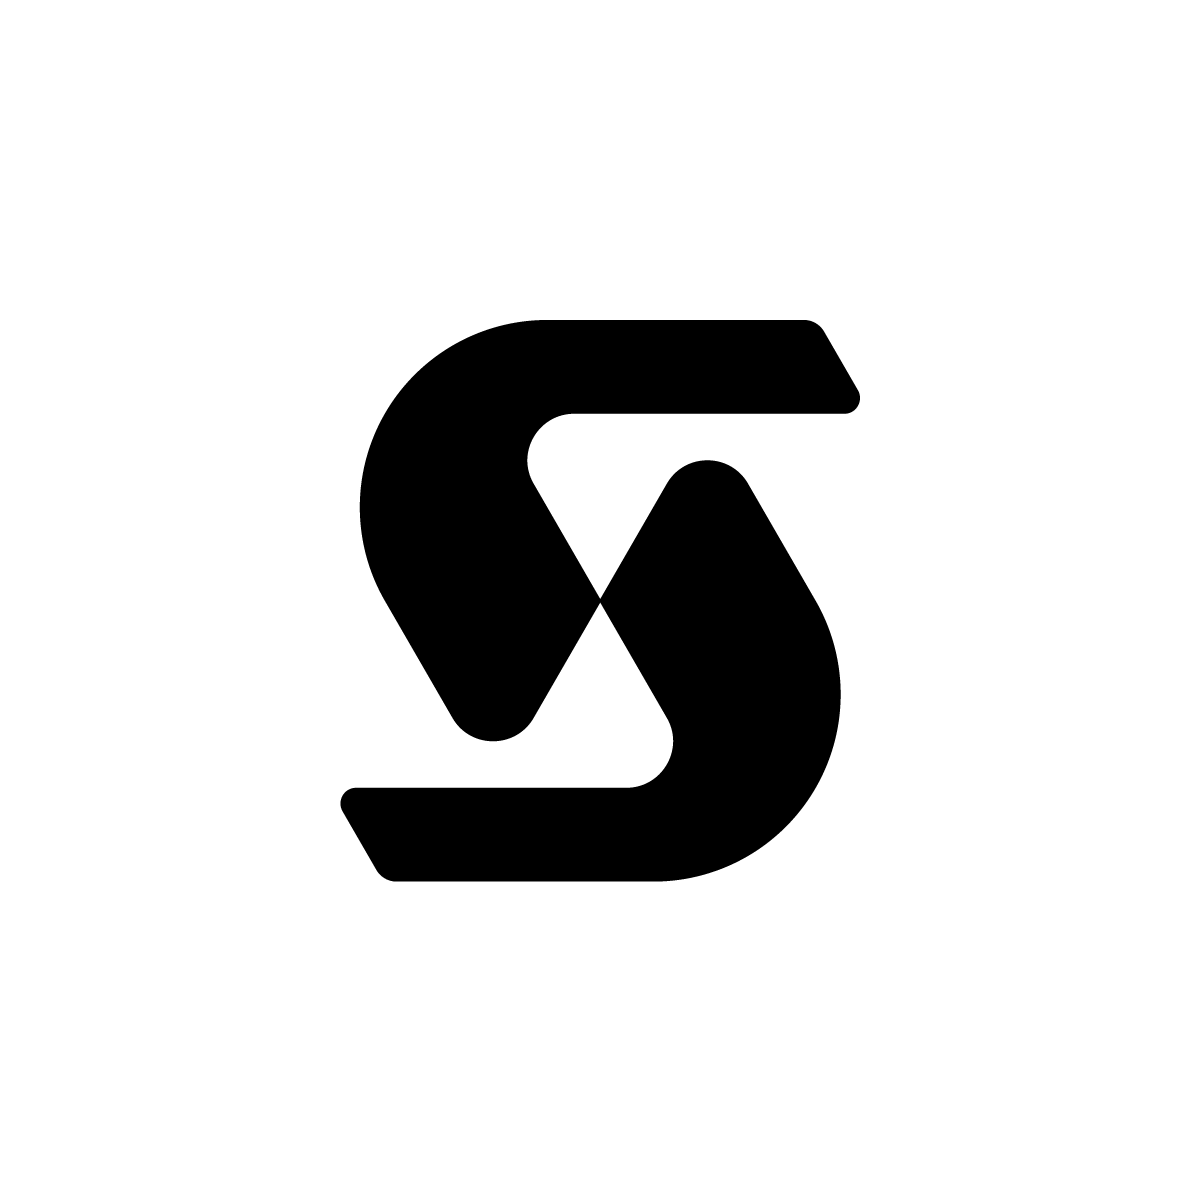 Abstract S Logo: Bold and modern S formed by two mirrored elements.